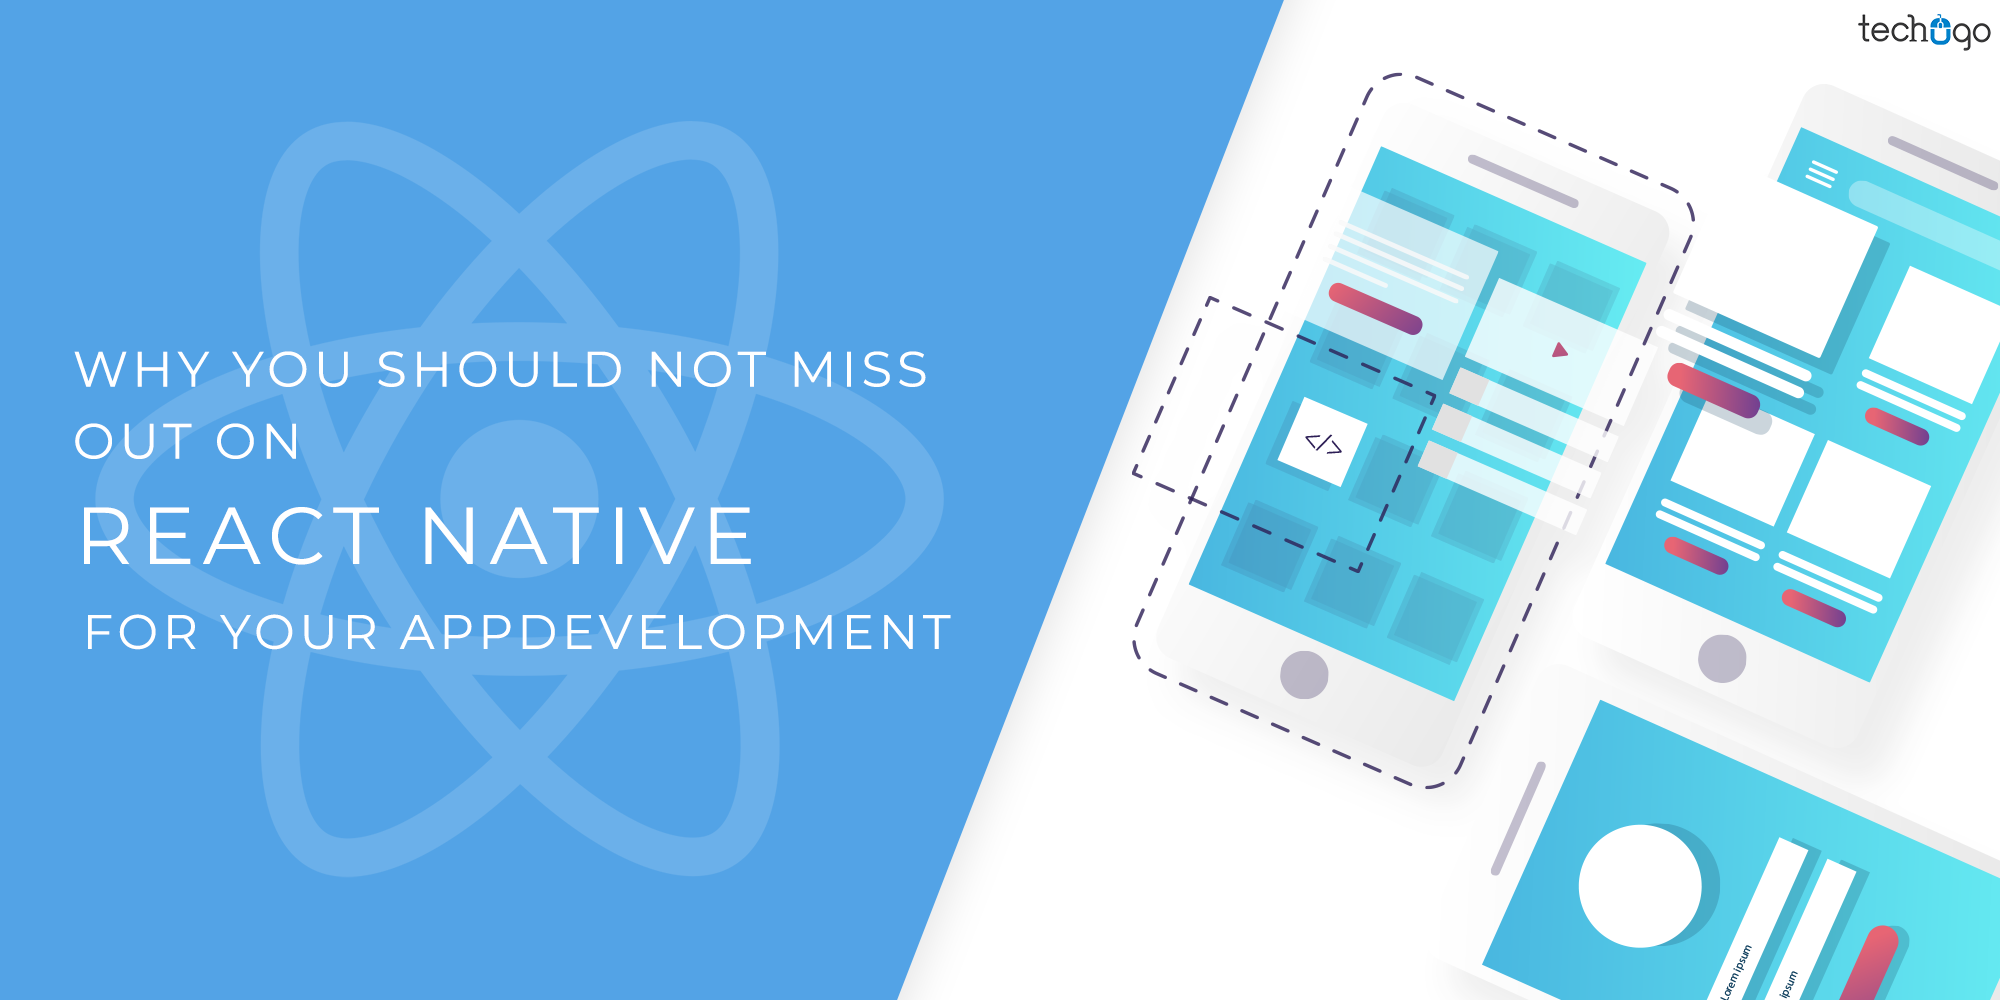 Why You Should Not Miss Out On React Native For Your App Development